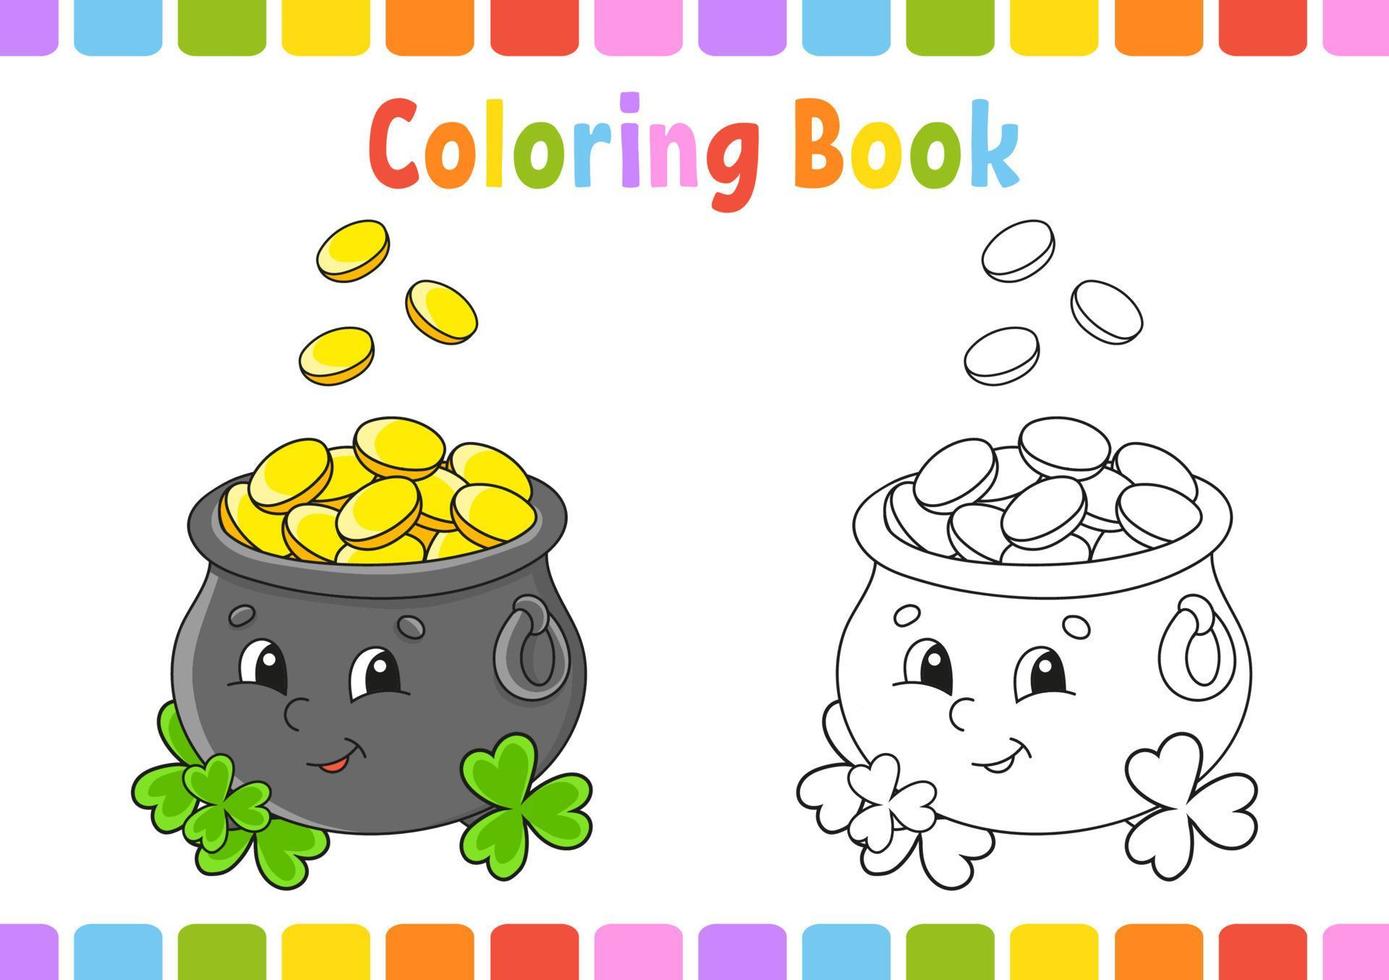 Coloring book for kids. St. Patrick's day. Cartoon character. Vector illustration. Fantasy page for children. Black contour silhouette. Isolated on white background.